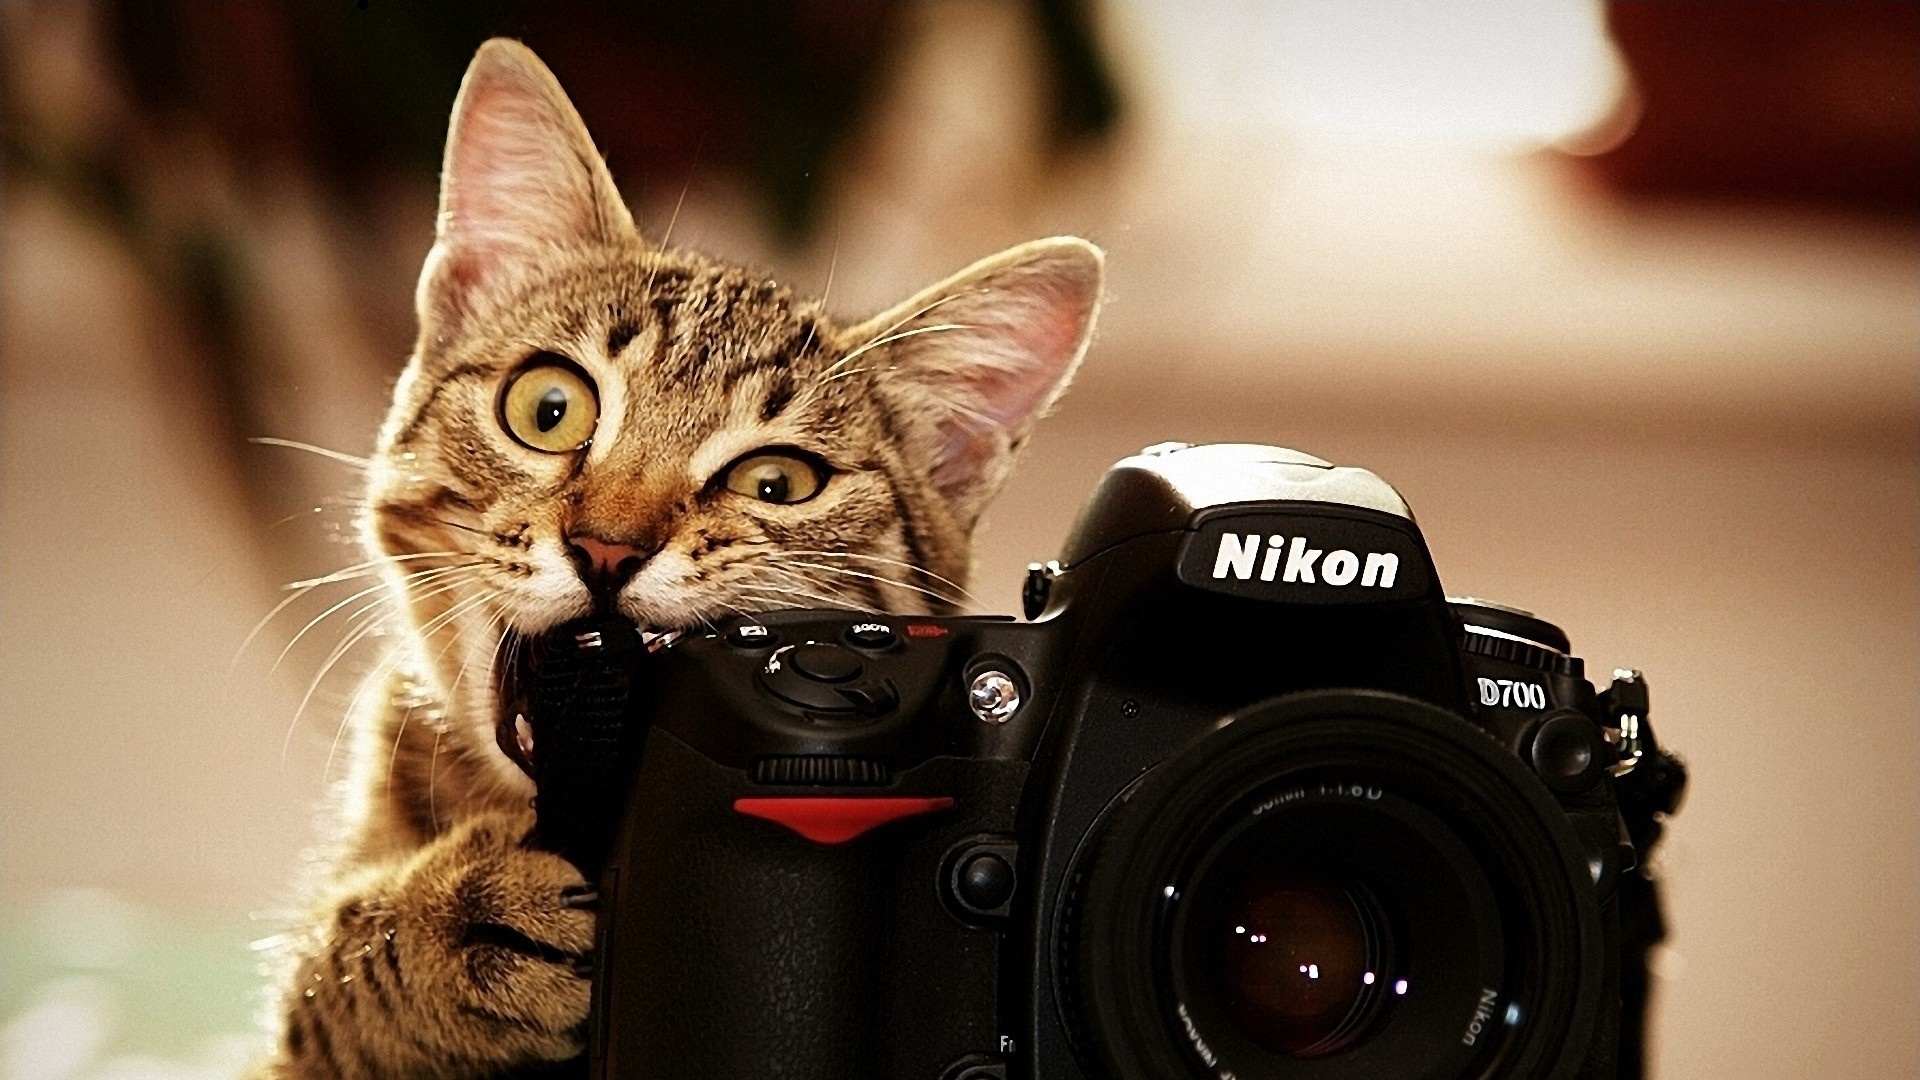 Wallpaper Cats Also Use The Camera - Funny Cat Backgrounds - HD Wallpaper 